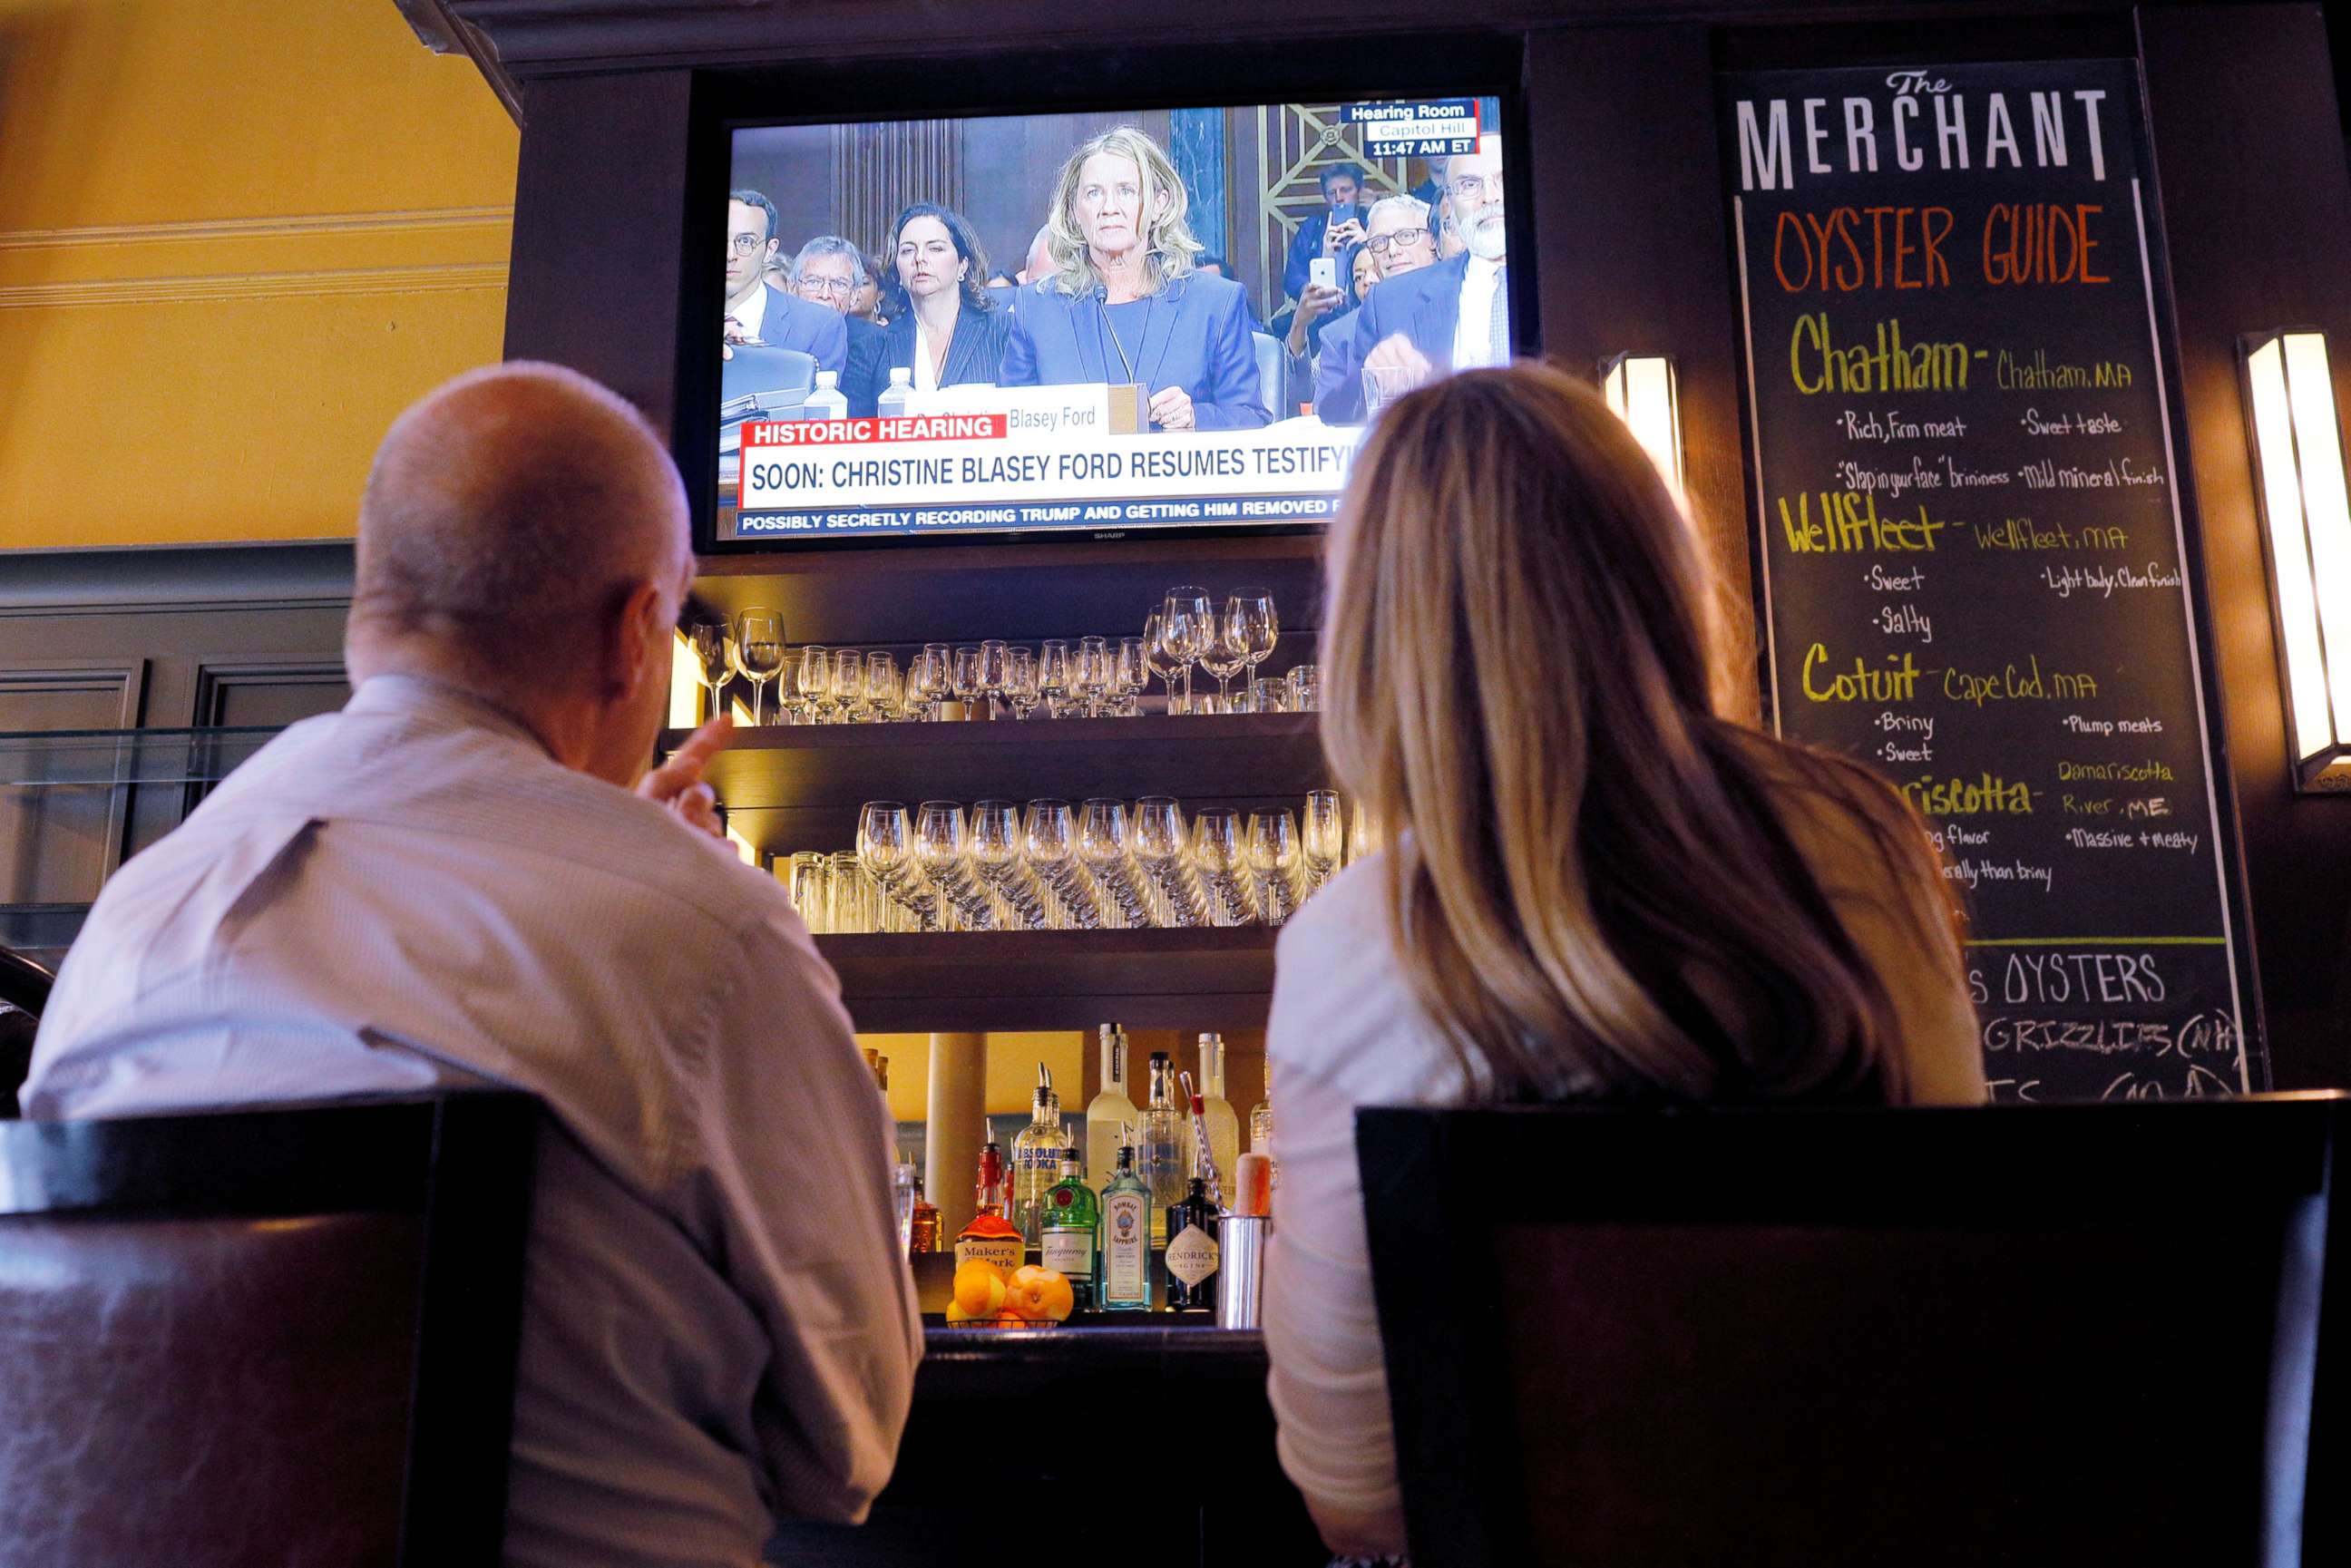 PHOTO: Diners watch the televised testimony by Christine Blasey Ford in the confirmation hearings for Supreme Court nominee Brett Kavanaugh by the Senate Judiciary Committee, at a restaurant in Boston, Sept. 27, 2018.